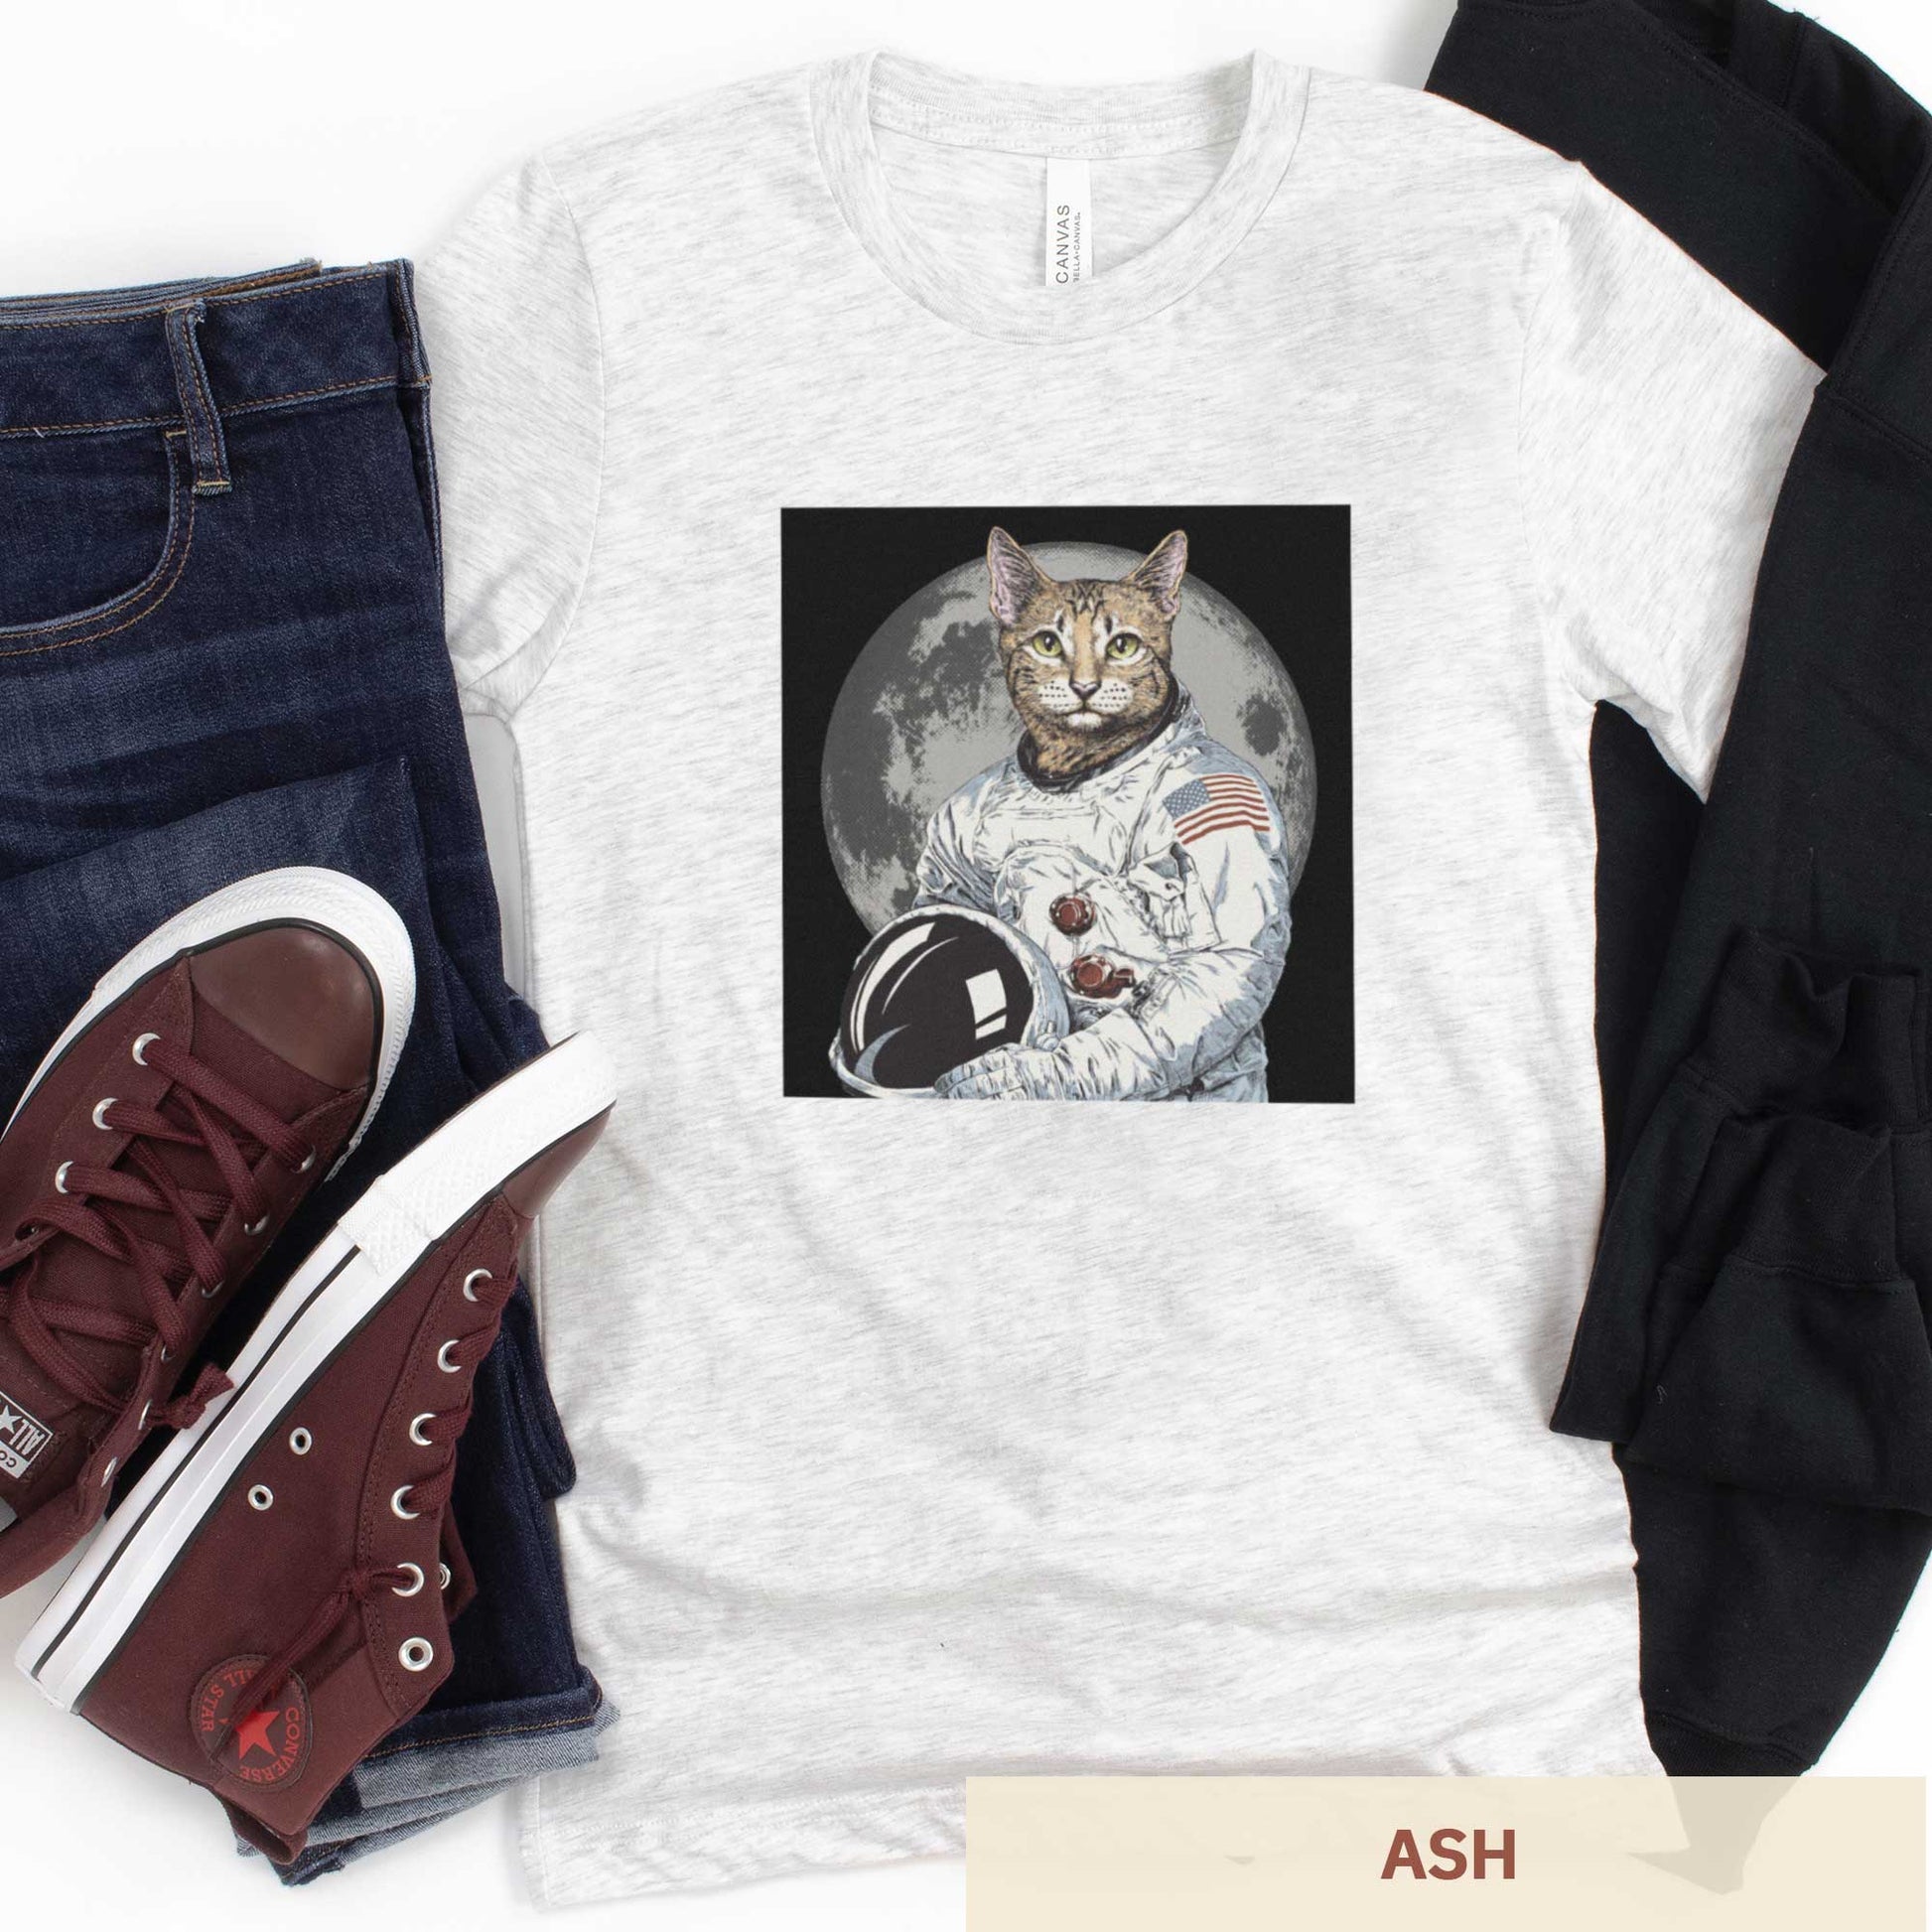 An ash Bella Canvas t-shirt featuring an illustrated portrait of a cat as a NASA astronaut with the moon in the background.